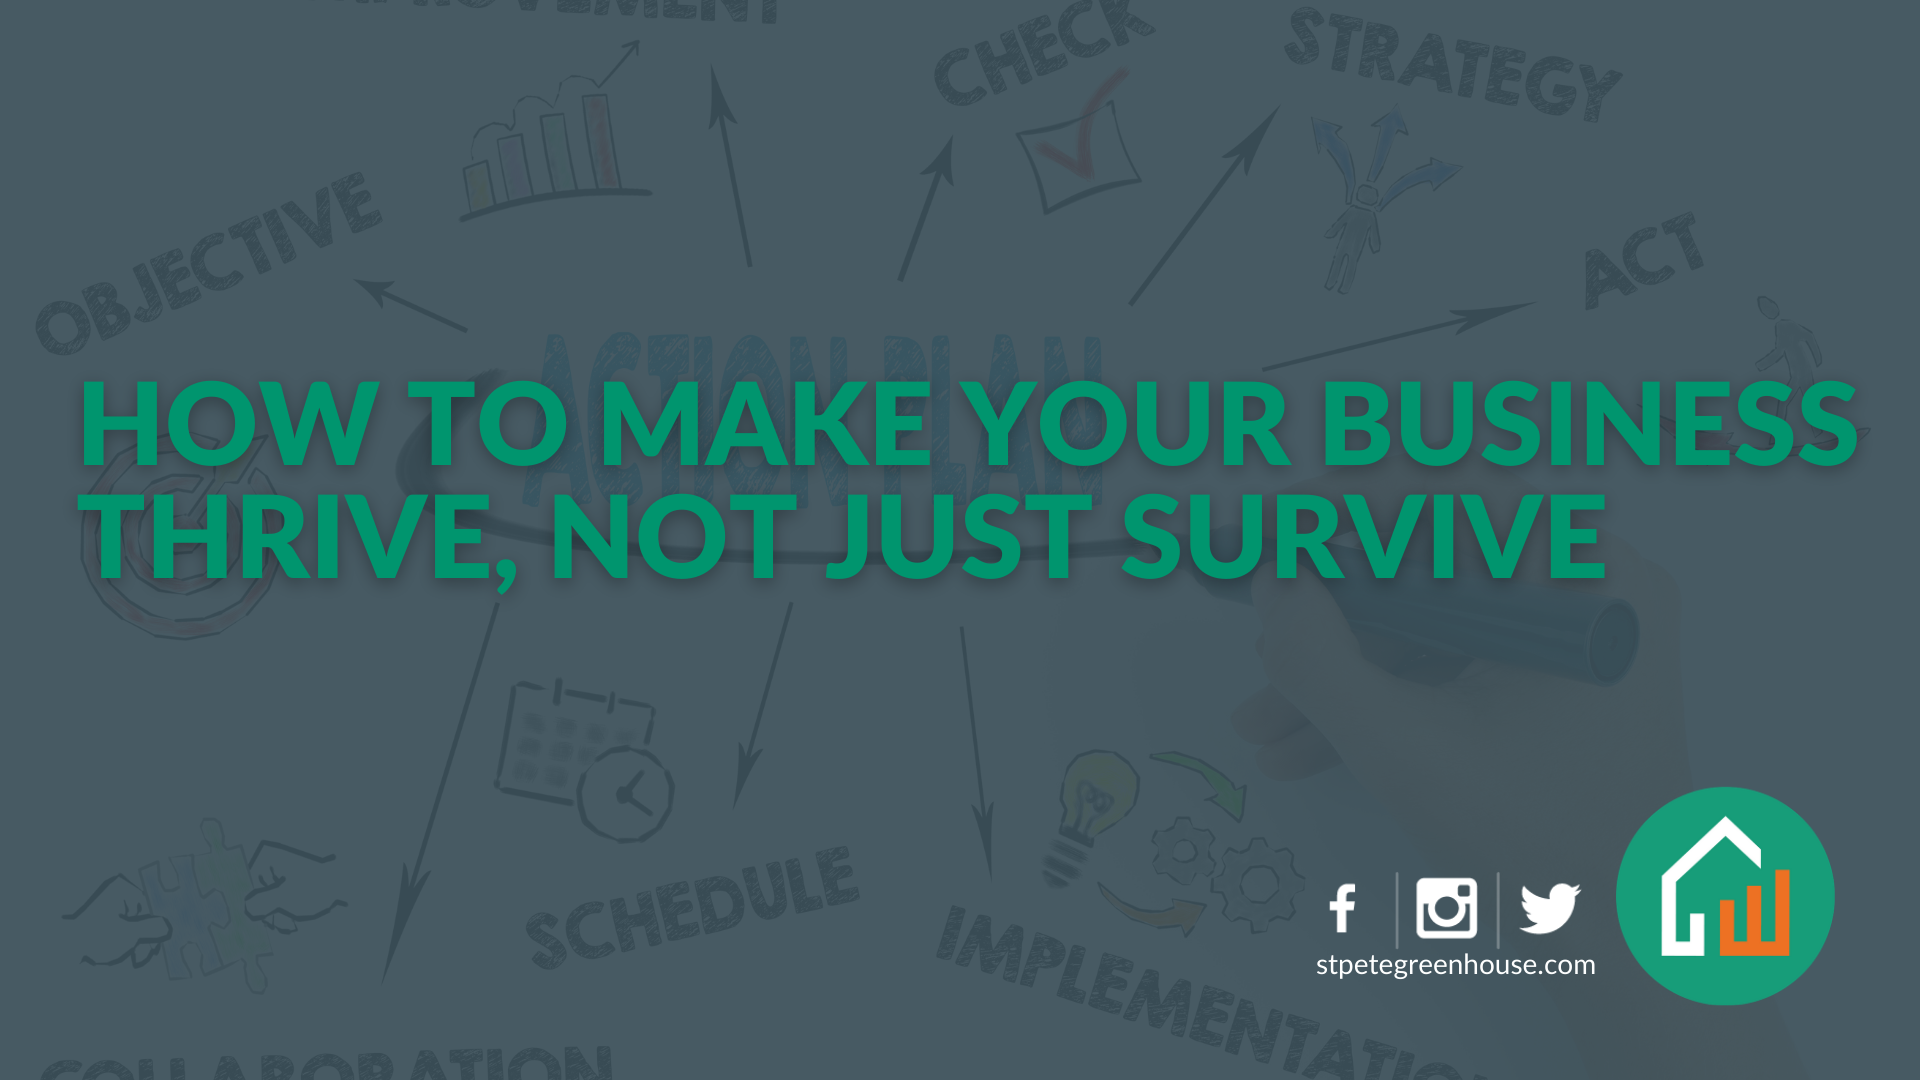 How to Make Your Business Thrive, Not Just Survive-image